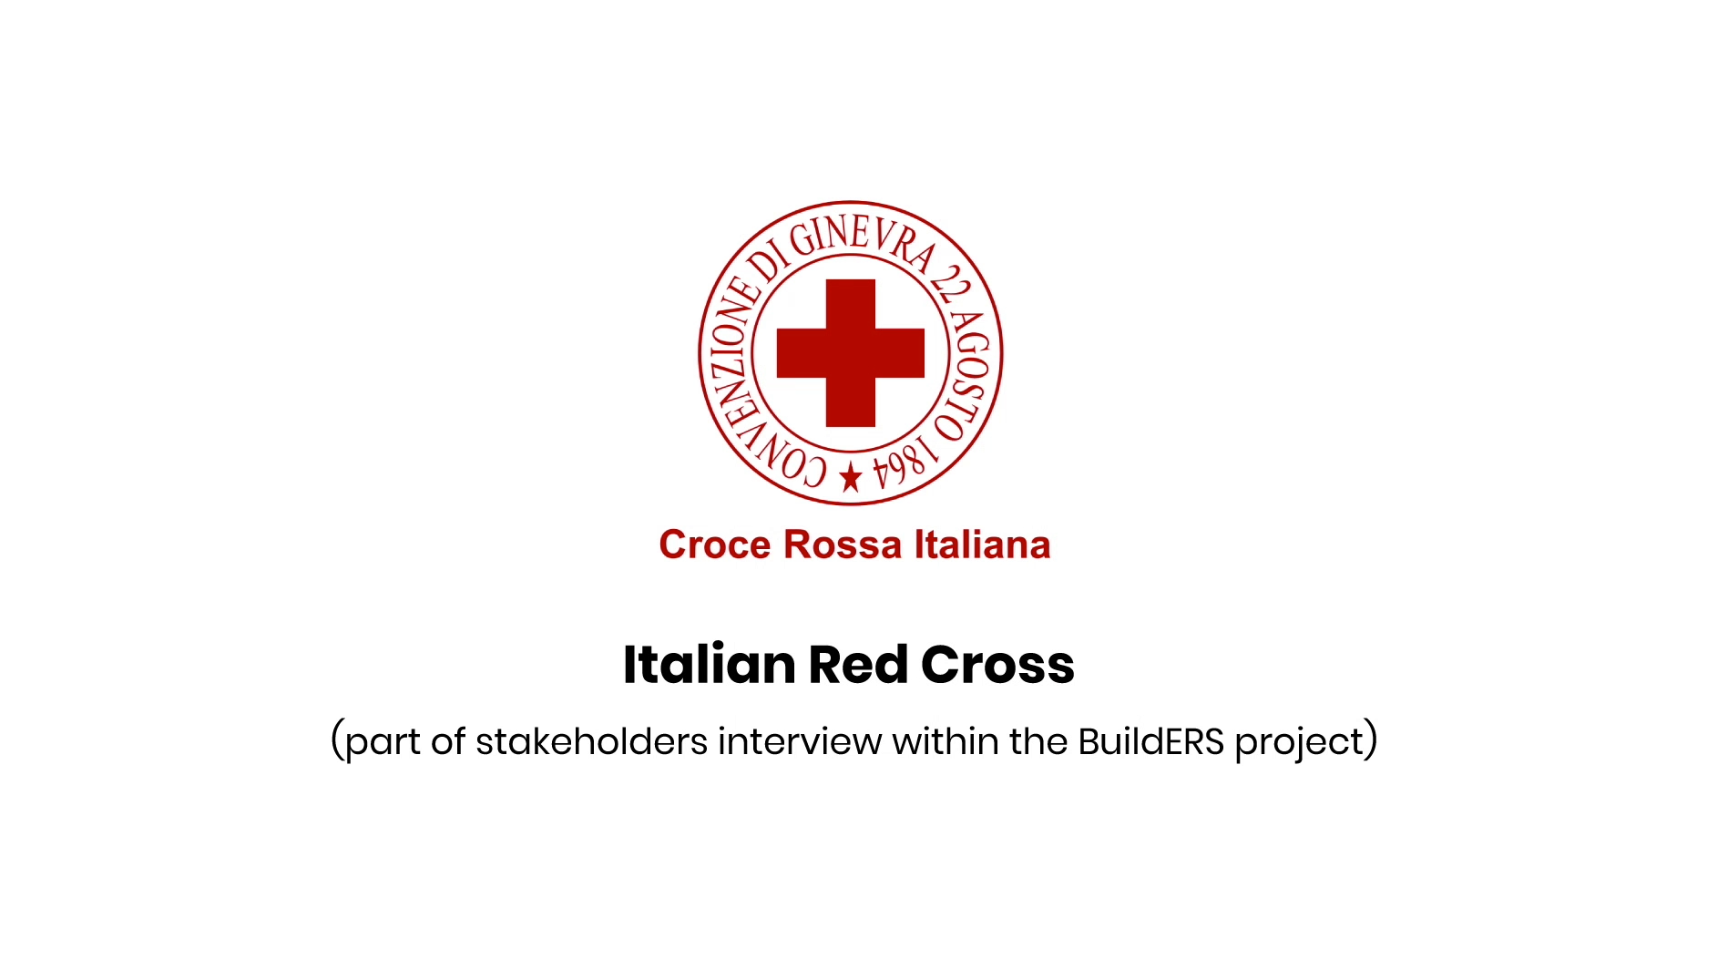 Interview with Lorenzo Massucchielli from the Italian Red Cross